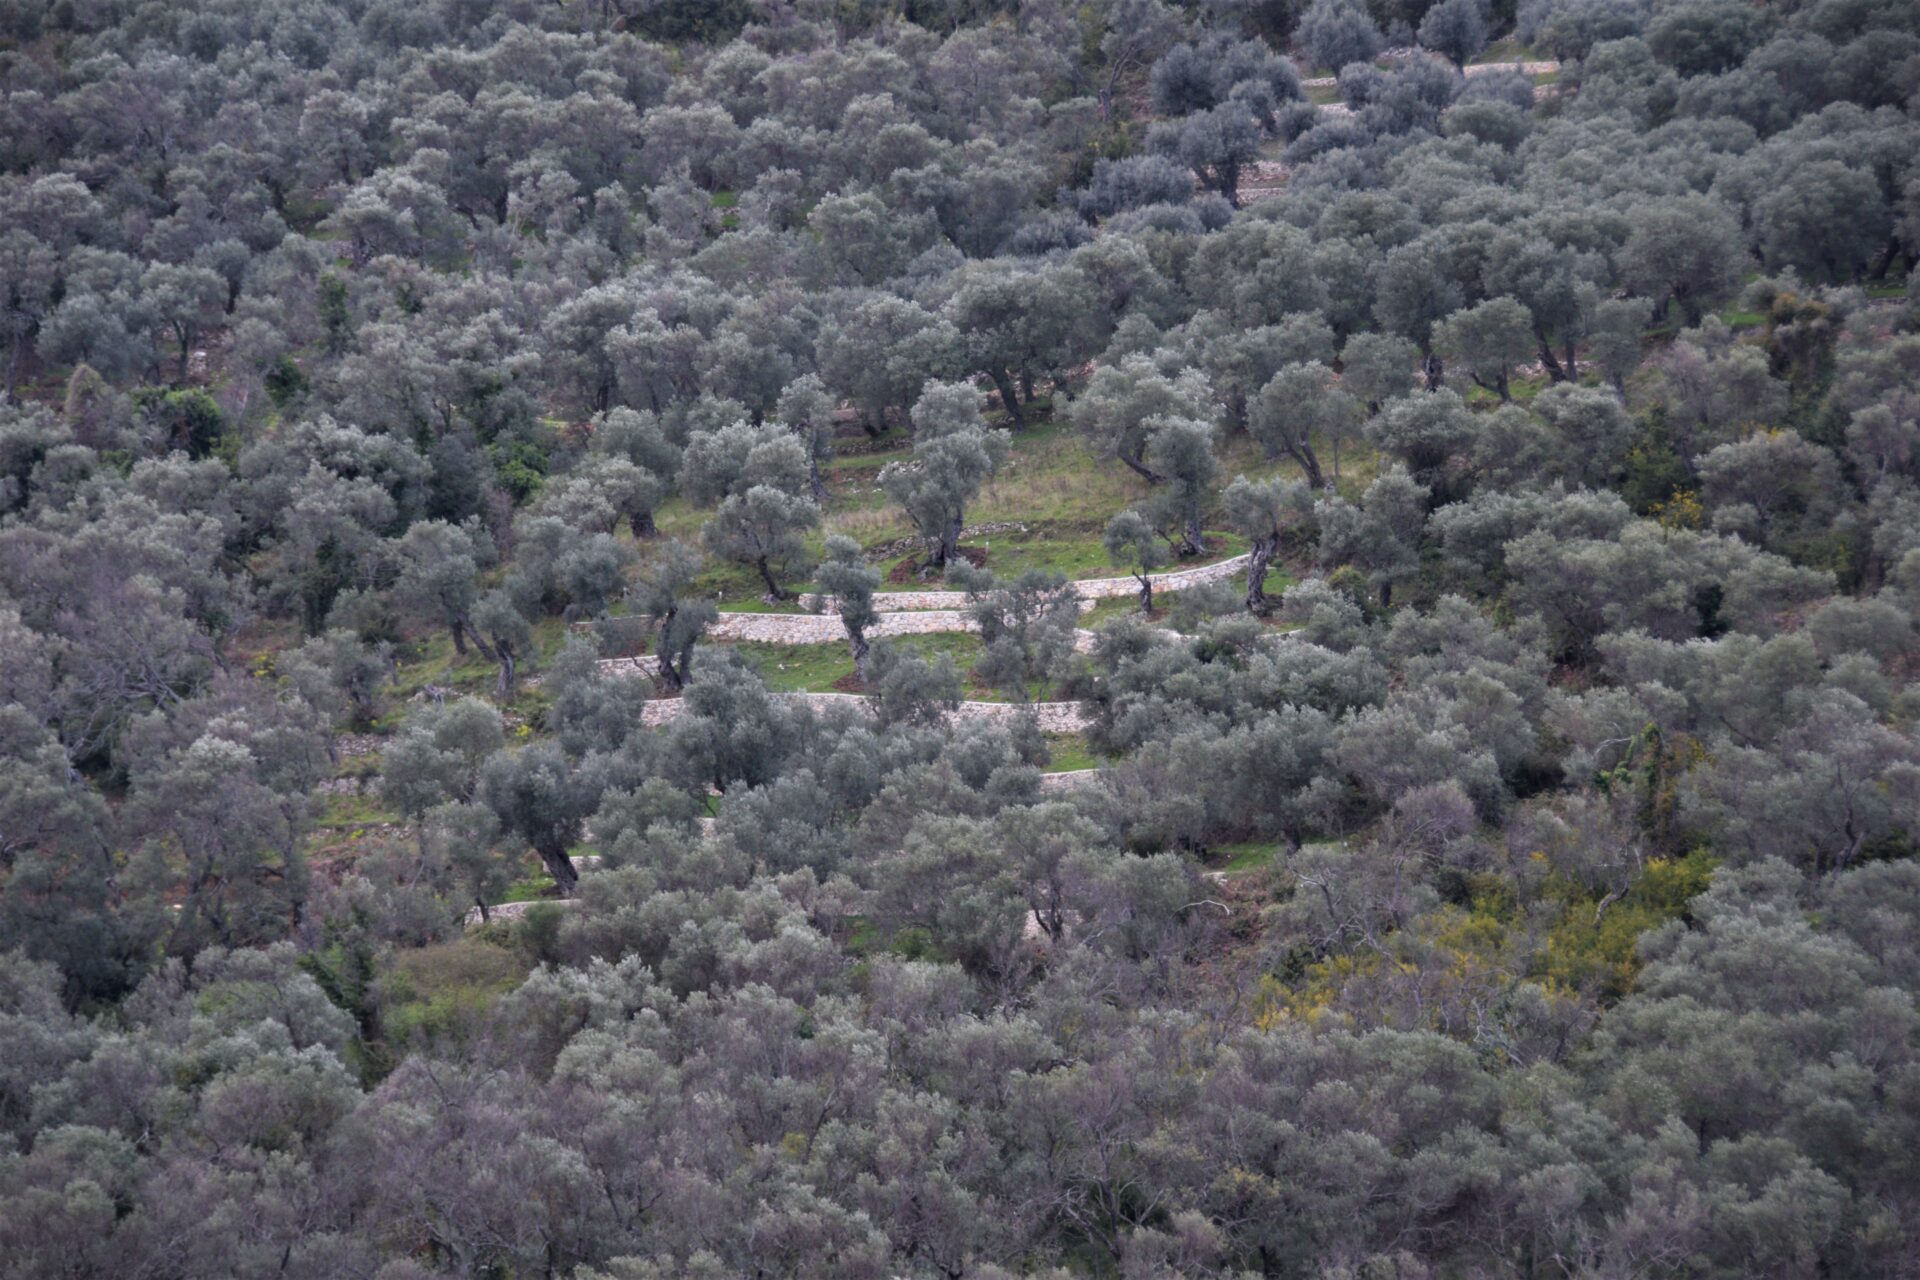 stone terraces surrounded by an olive tree forest